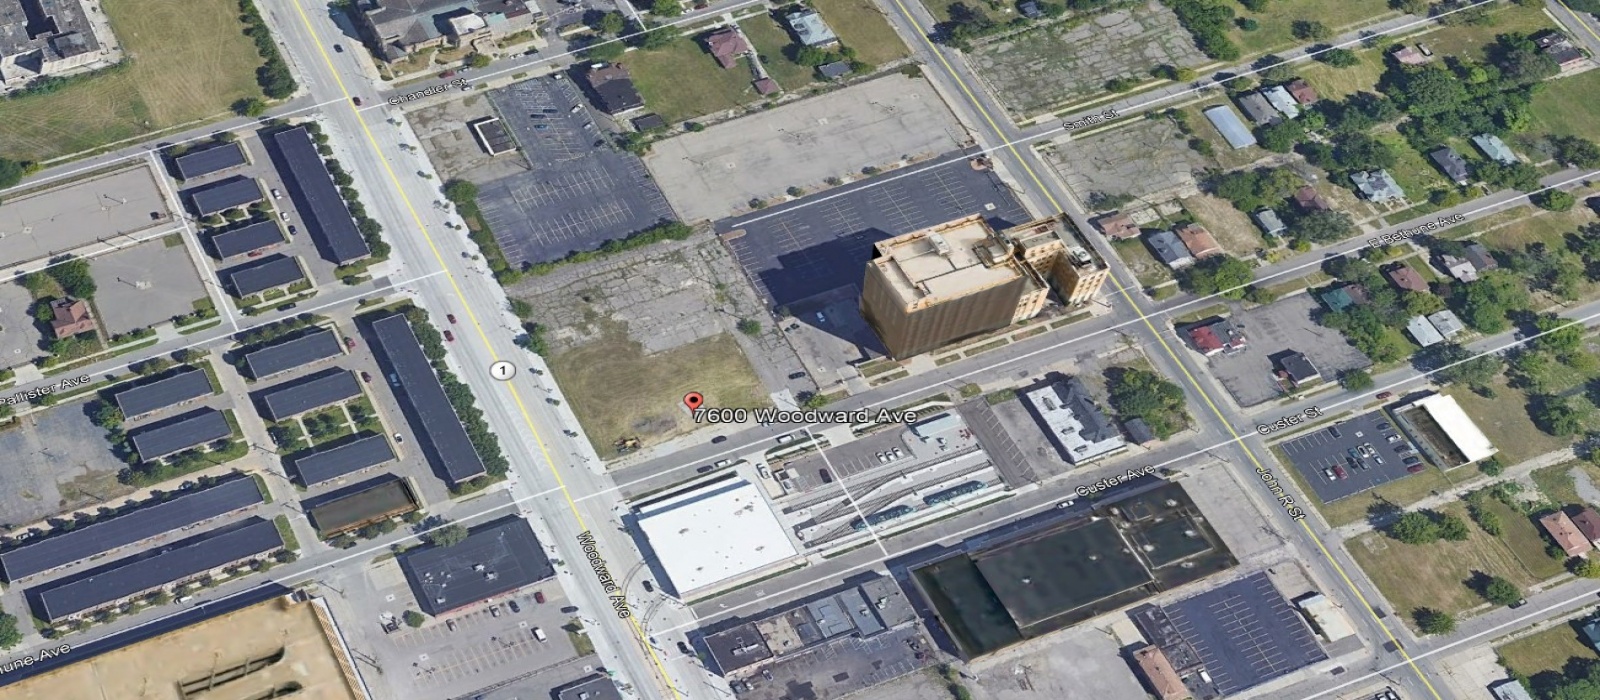 7600 Woodward, Detroit, Michigan 48202, ,Vacant Land,For Sale,7600 Woodward,1045